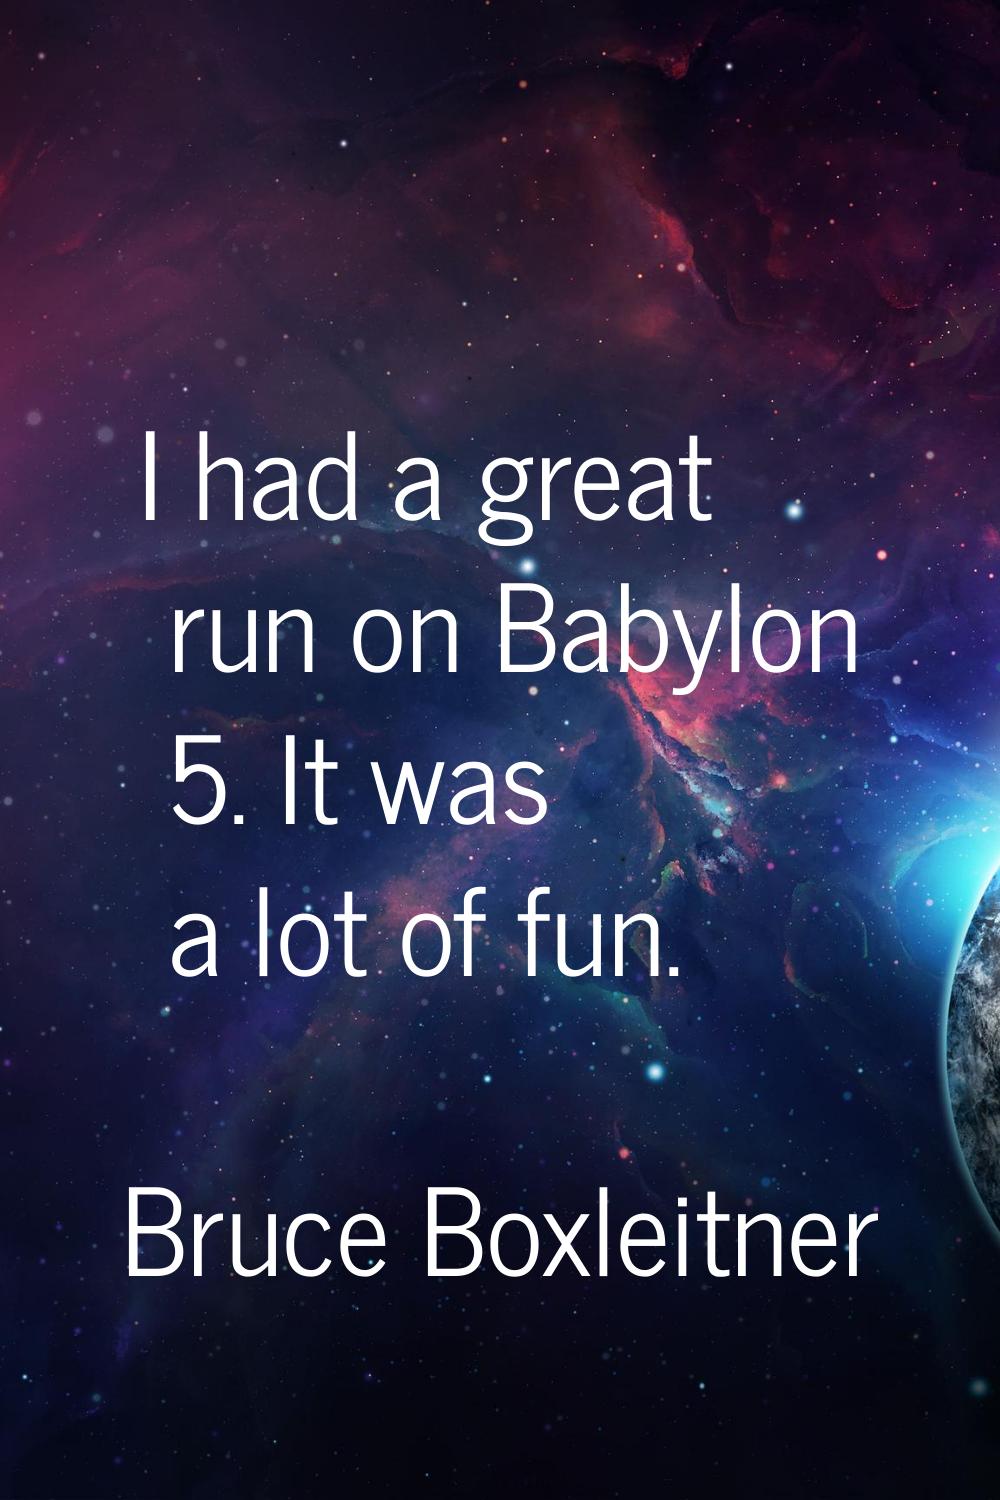 I had a great run on Babylon 5. It was a lot of fun.